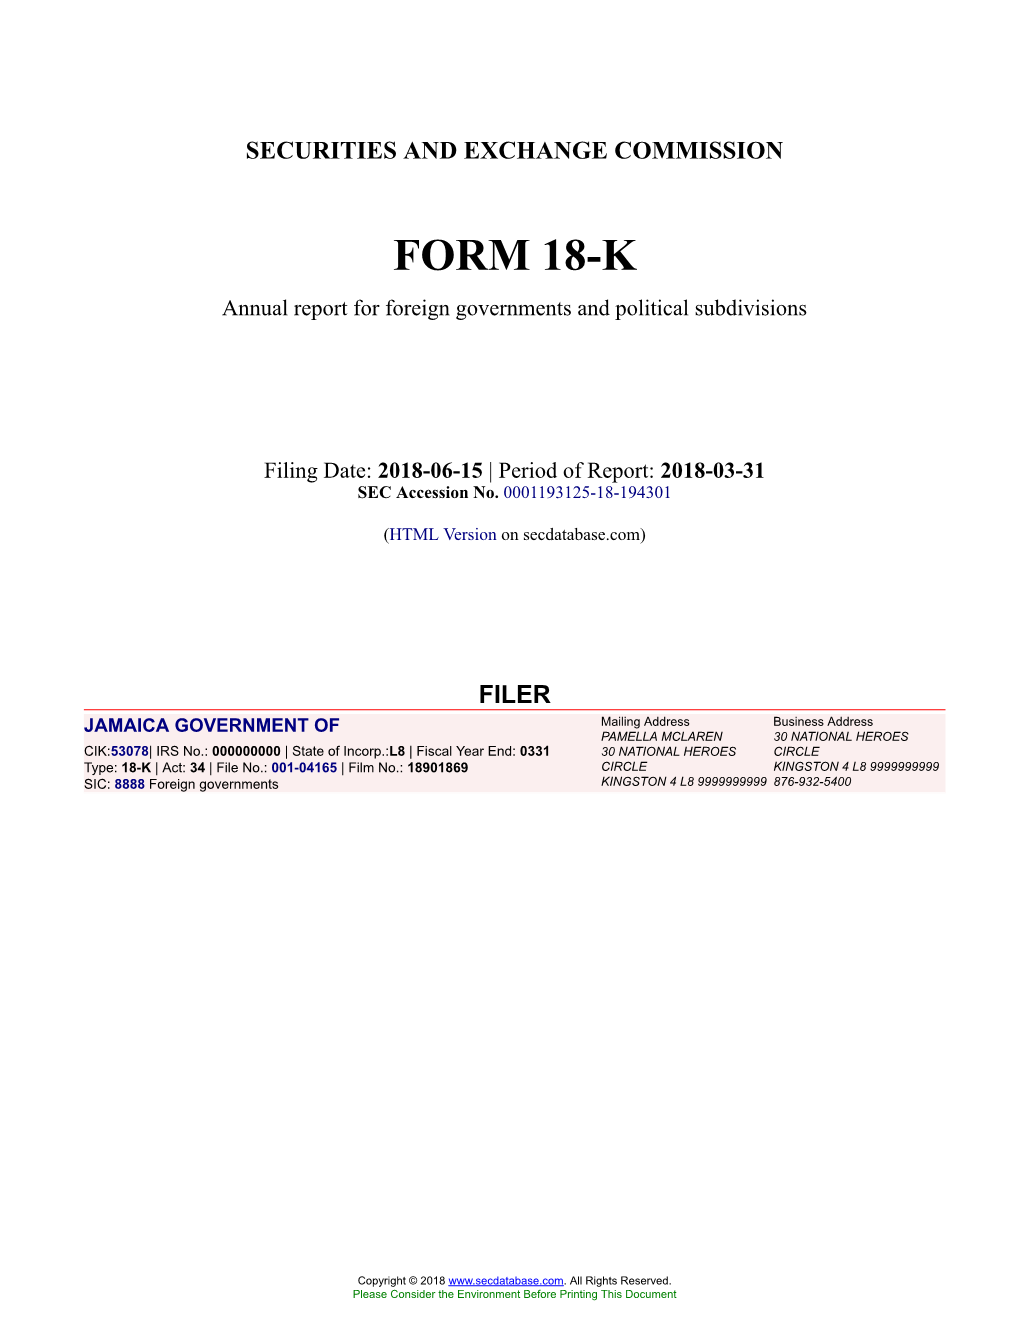 JAMAICA GOVERNMENT of Form 18-K Filed 2018-06-15